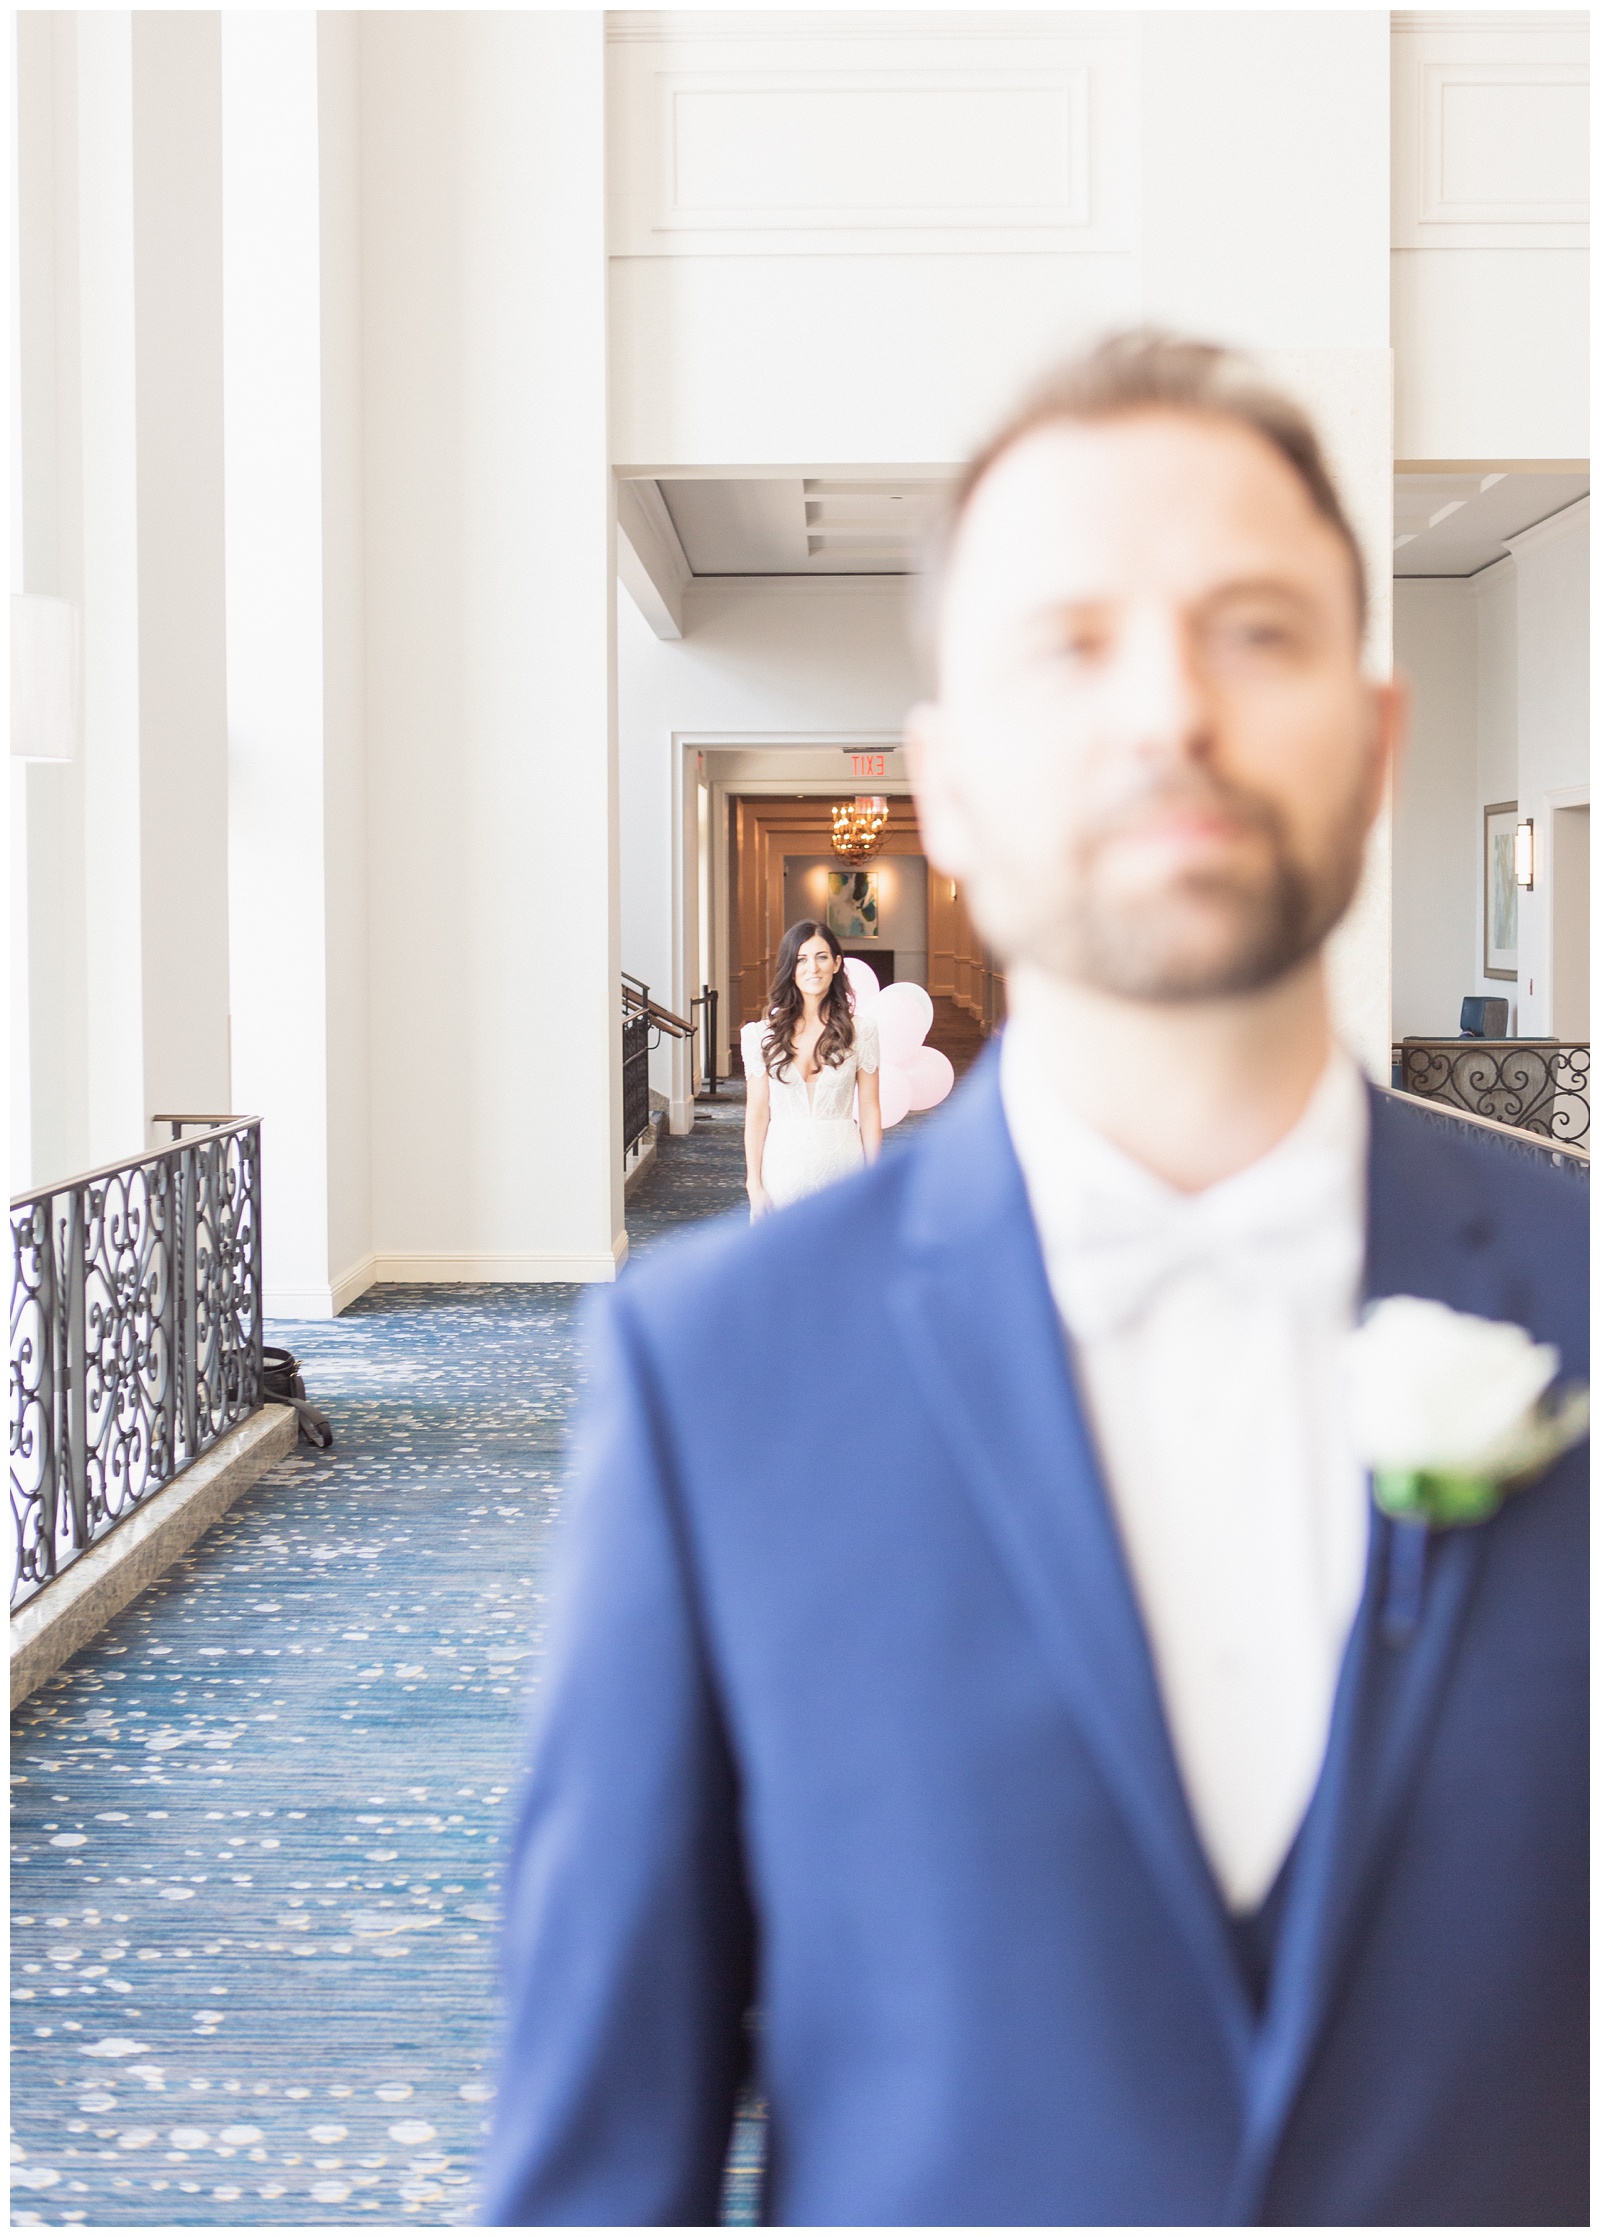 Groom waiting for bride at first look | Matlock and Kelly Photography